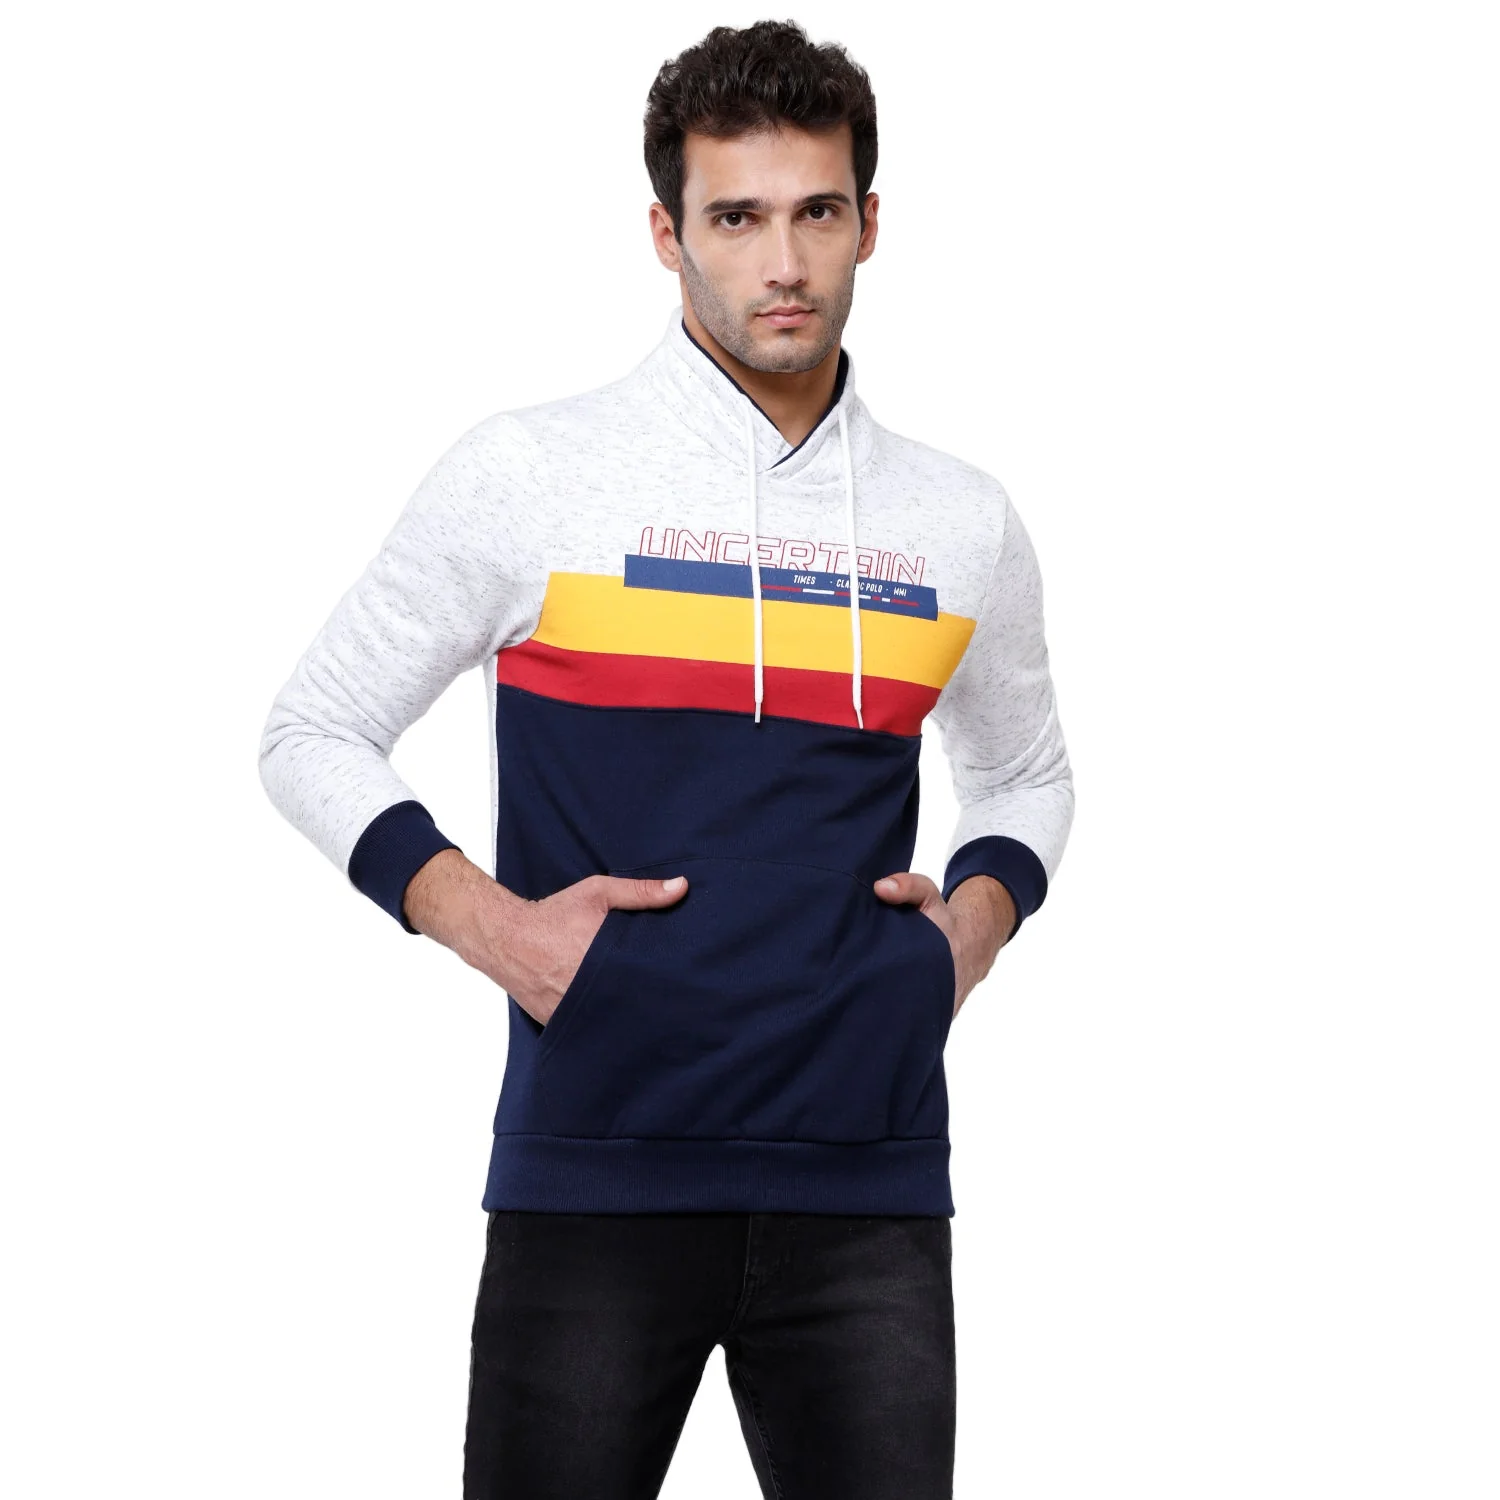 Classic Polo Men's Color Block Full Sleeve White & Navy H Neck Sweat Shirt - CPSS-324 A